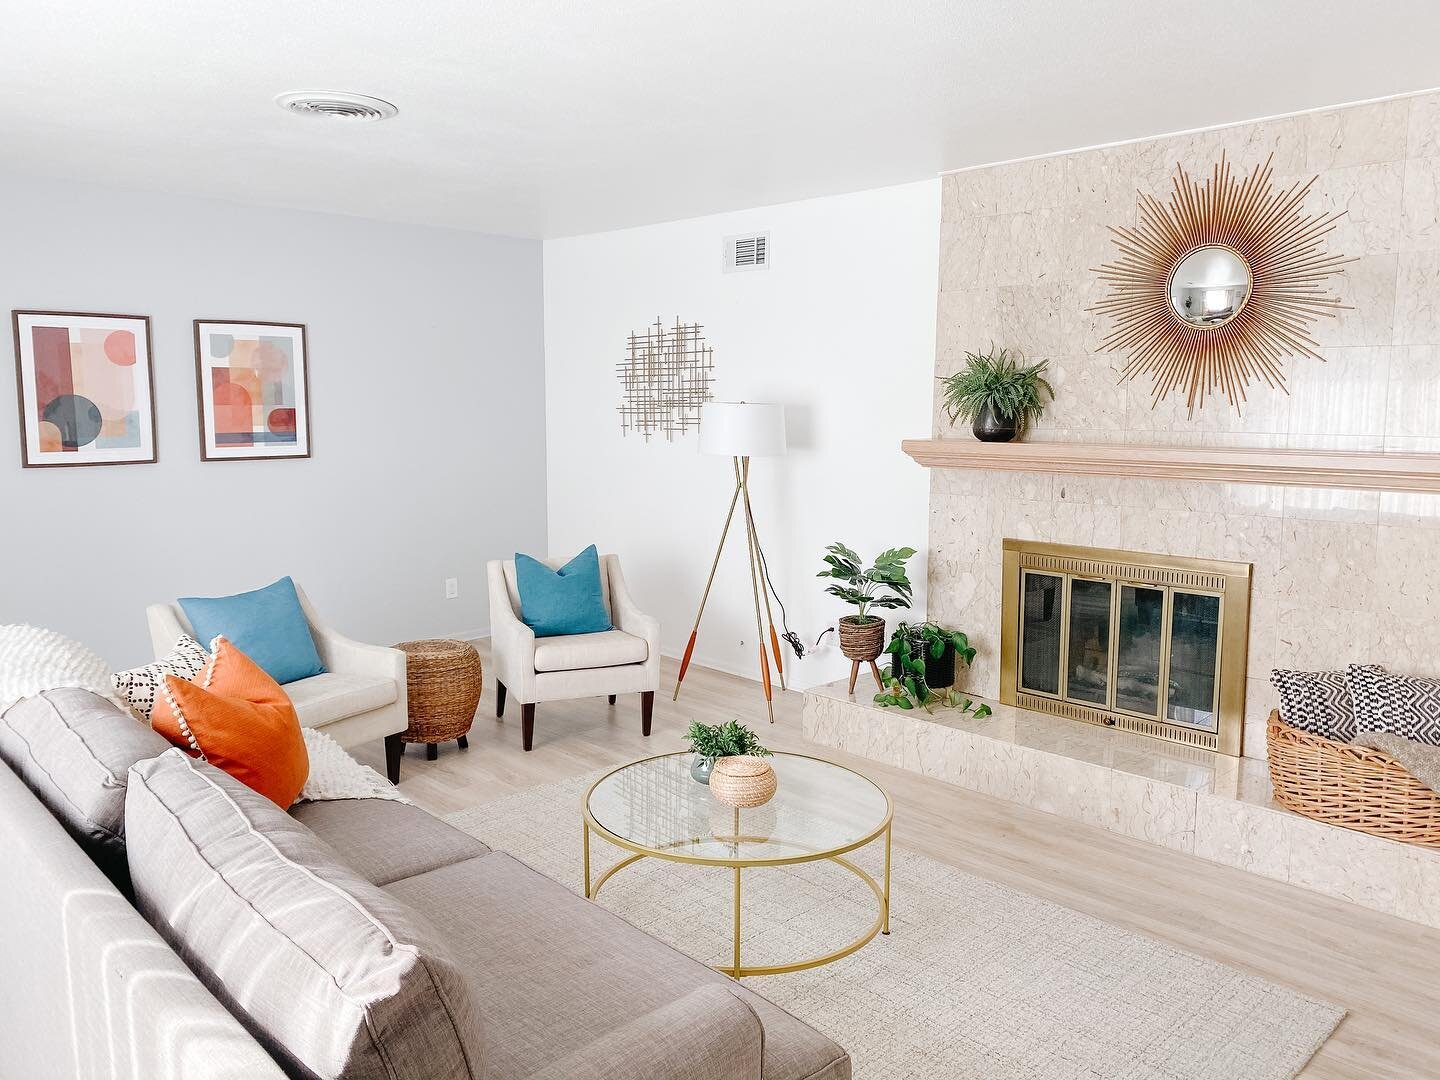 This home definitely called for a little mid-century modern vibe.  It was fun to bring it all together! #stagedtosell #stagingsells #staging#staginghomes #homestaging #homestagingworks #homedesign #midcenturymodern